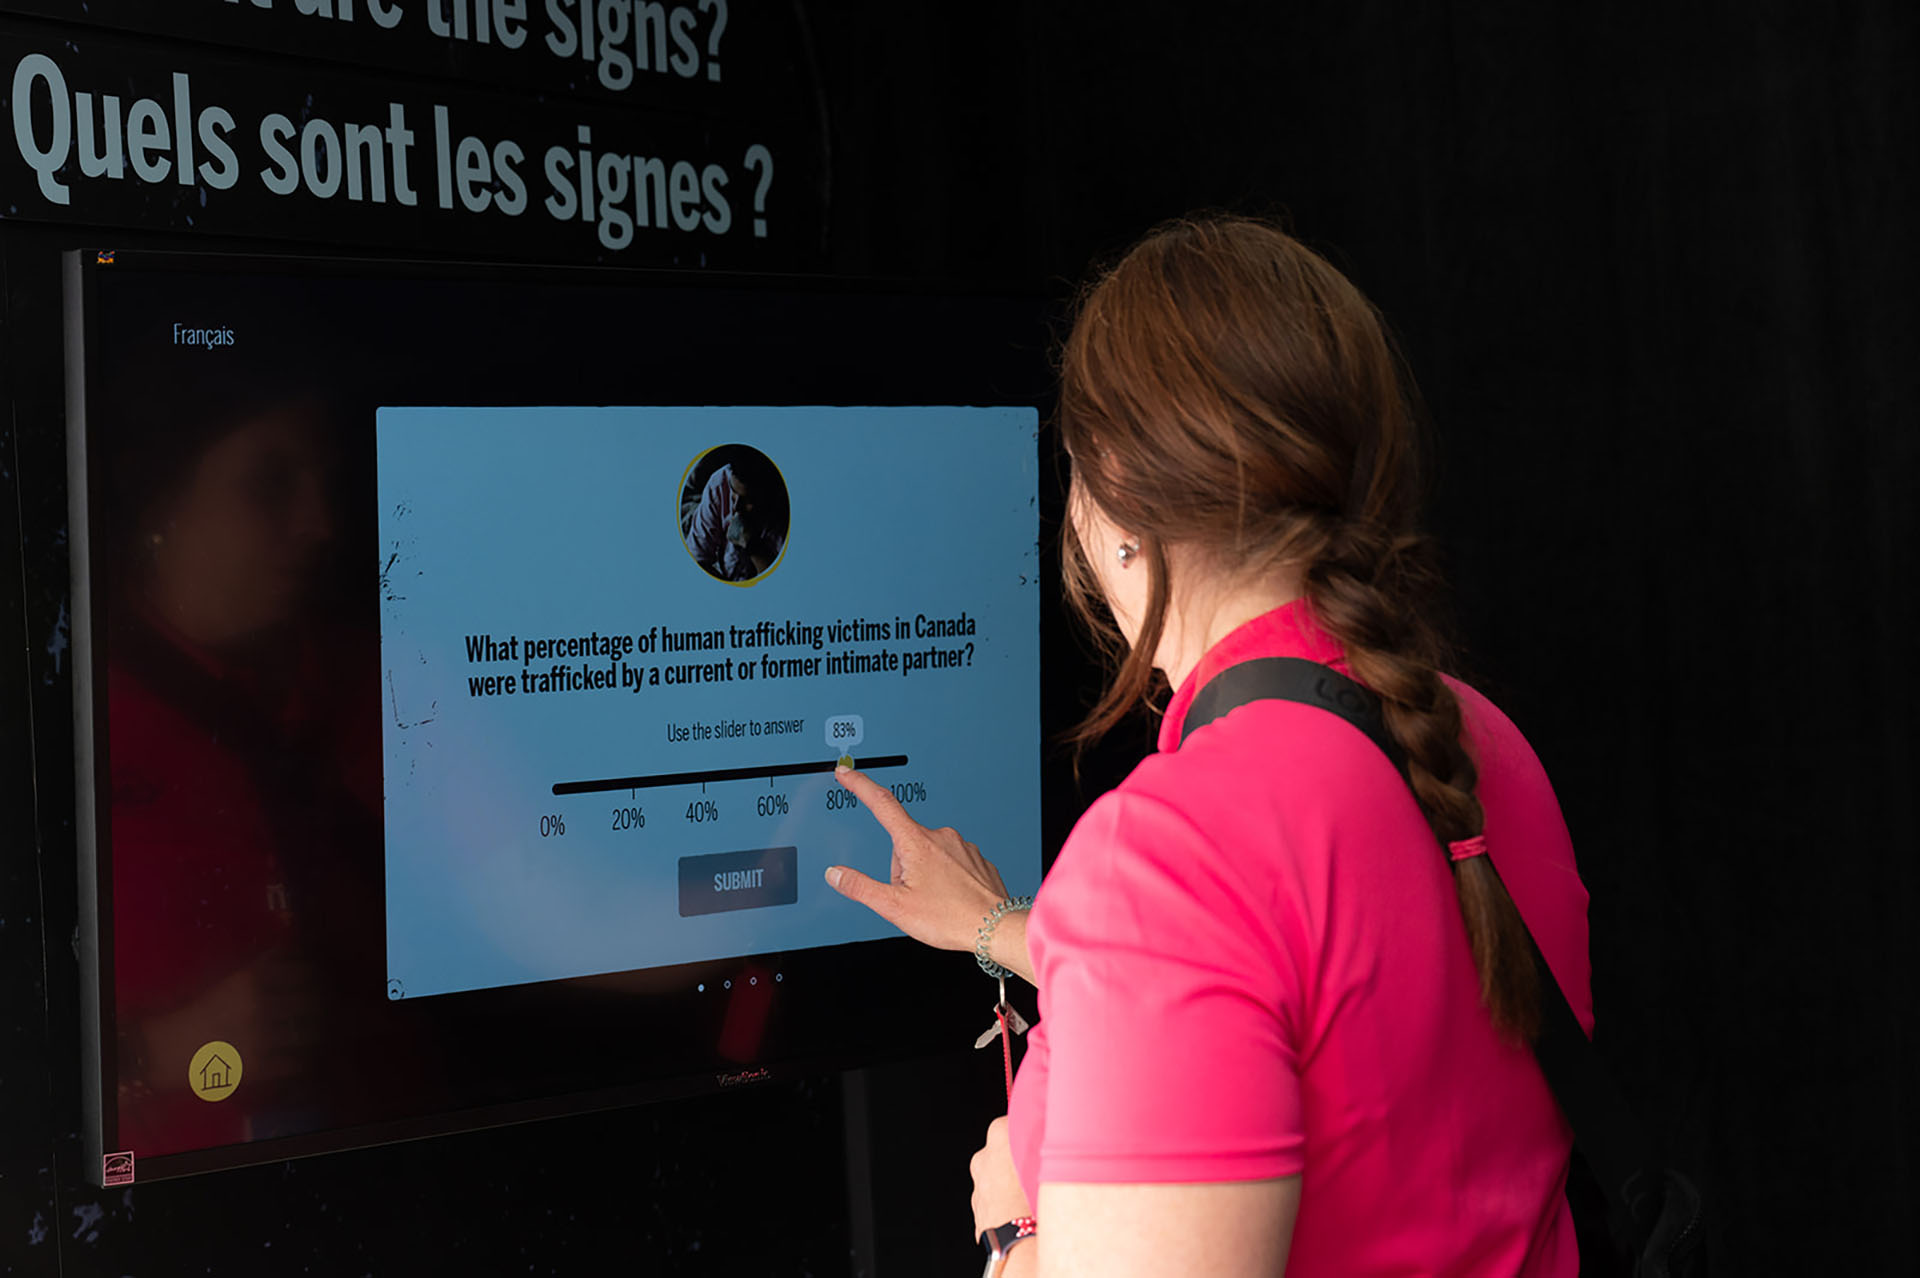 A person in a red t-shirt answering a question on a touchscreen